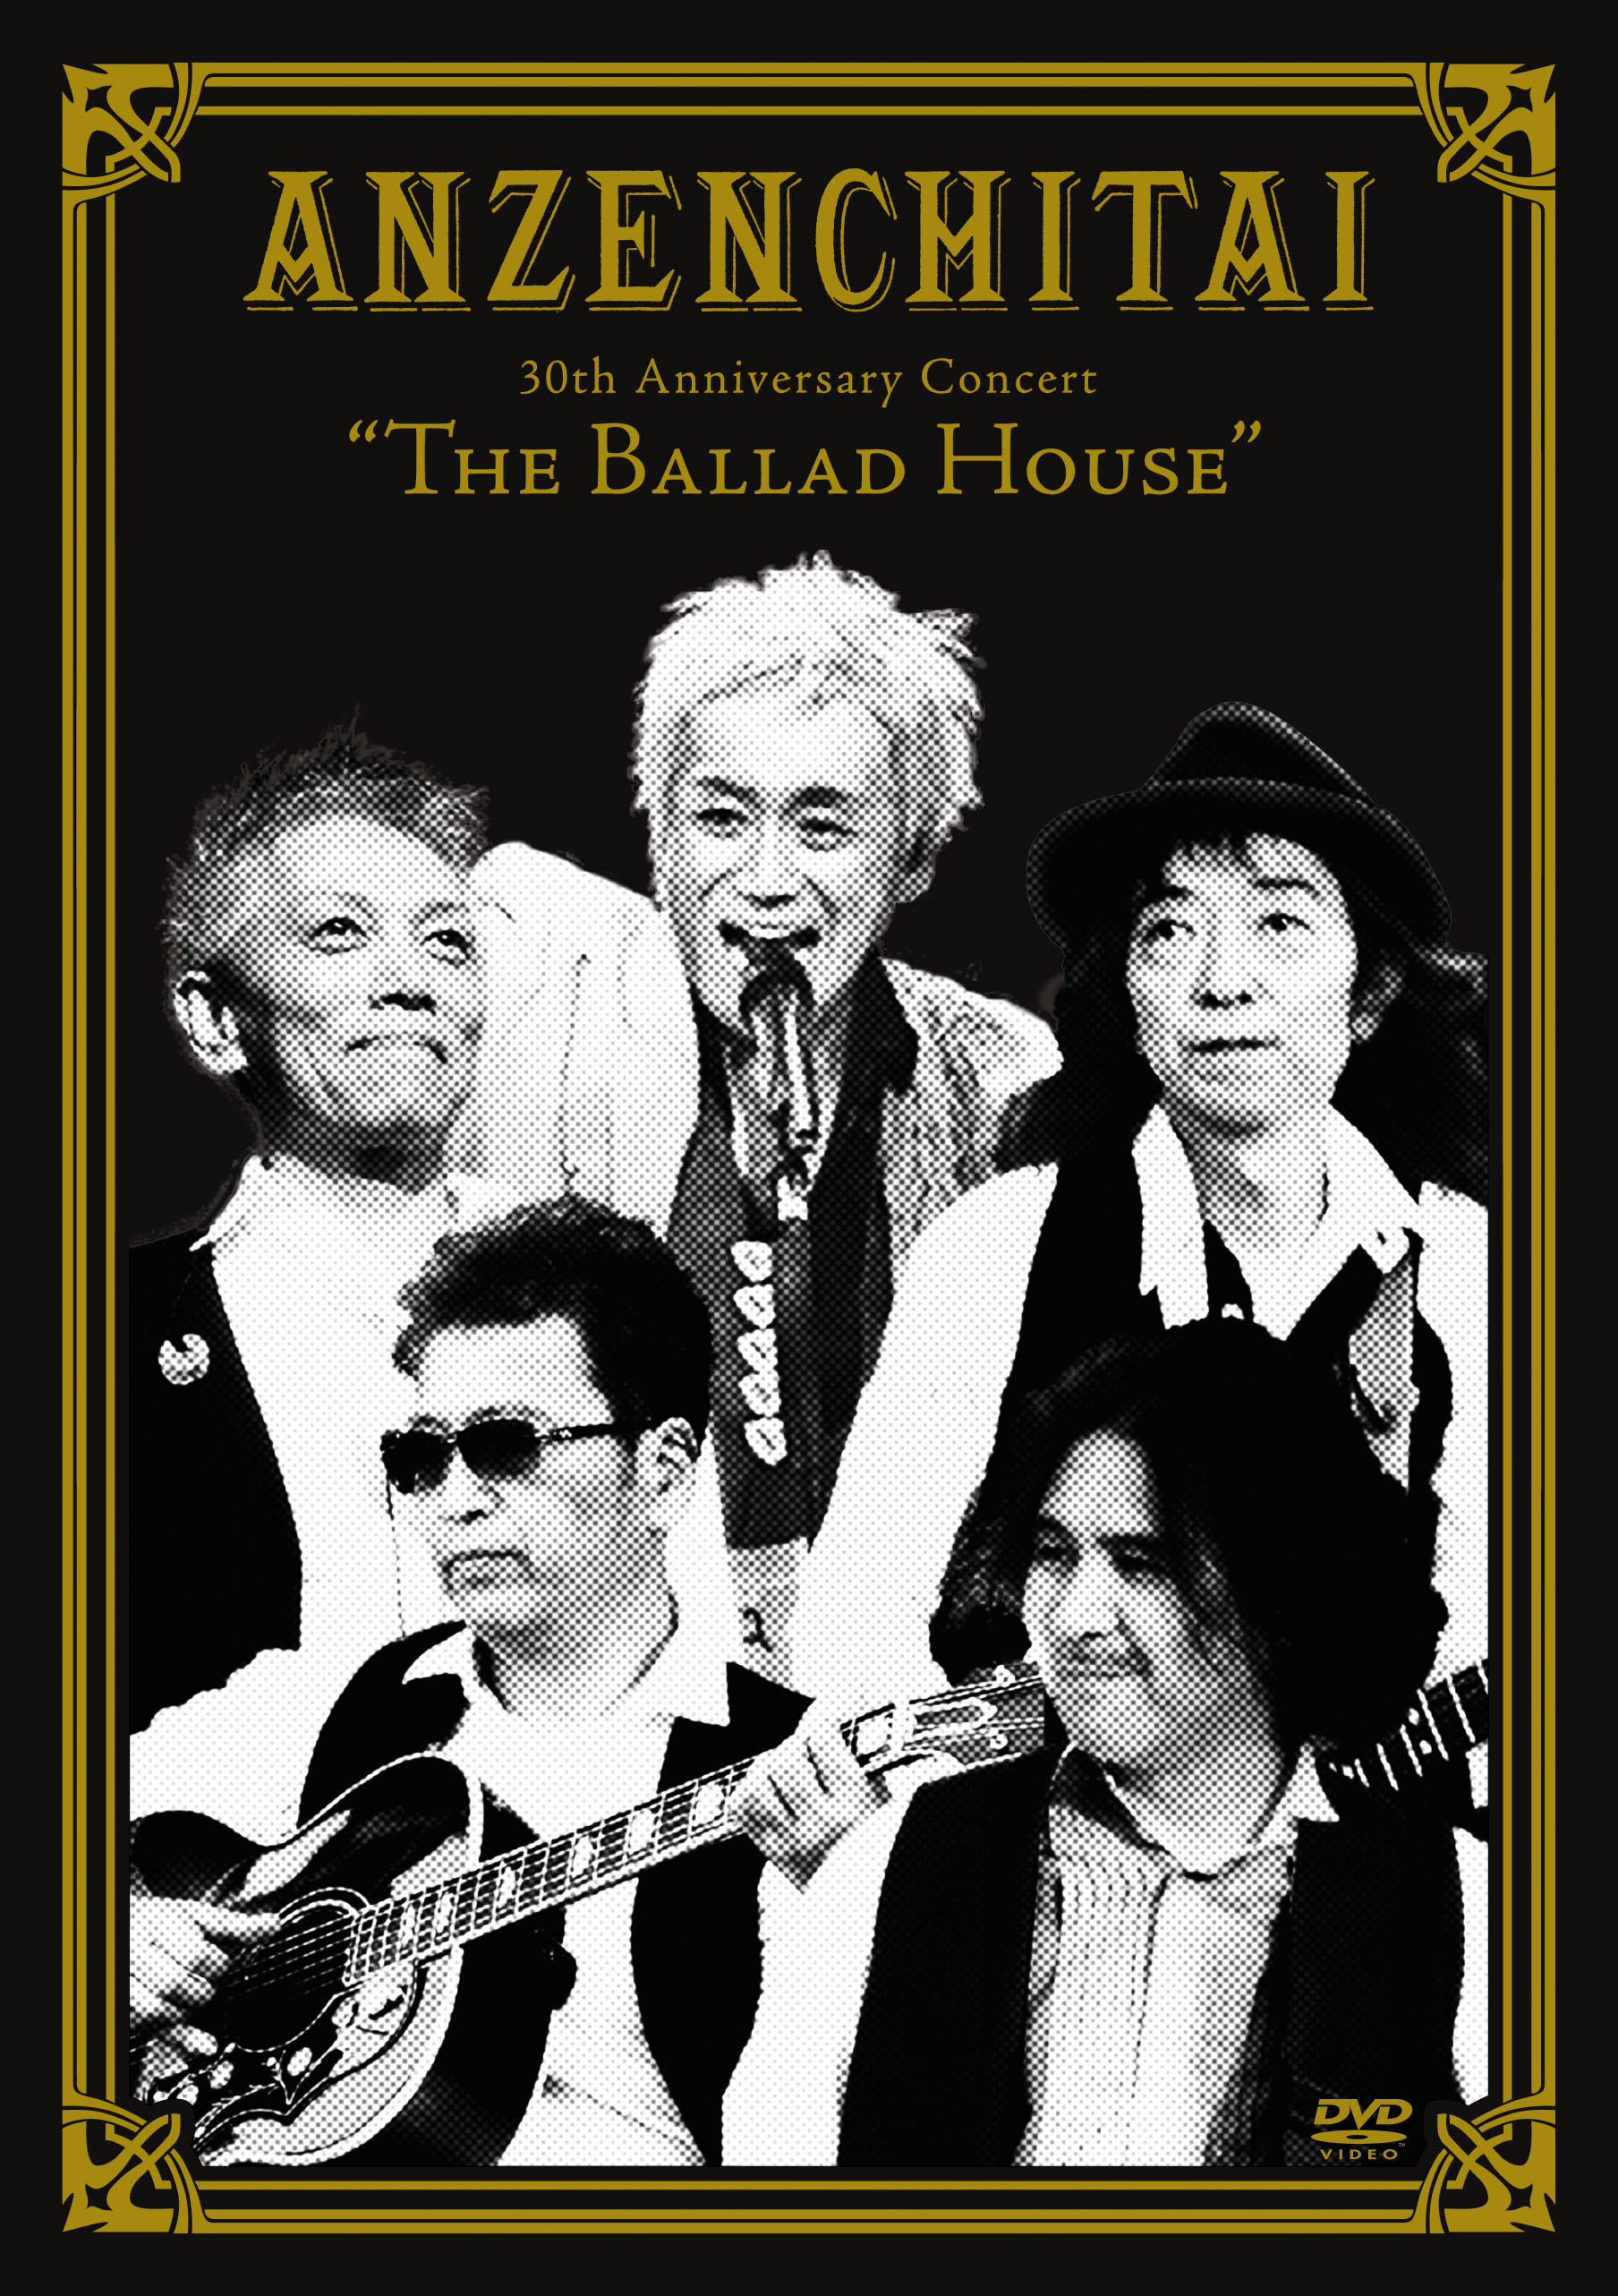 30th Anniversary Concert“The Ballad House”